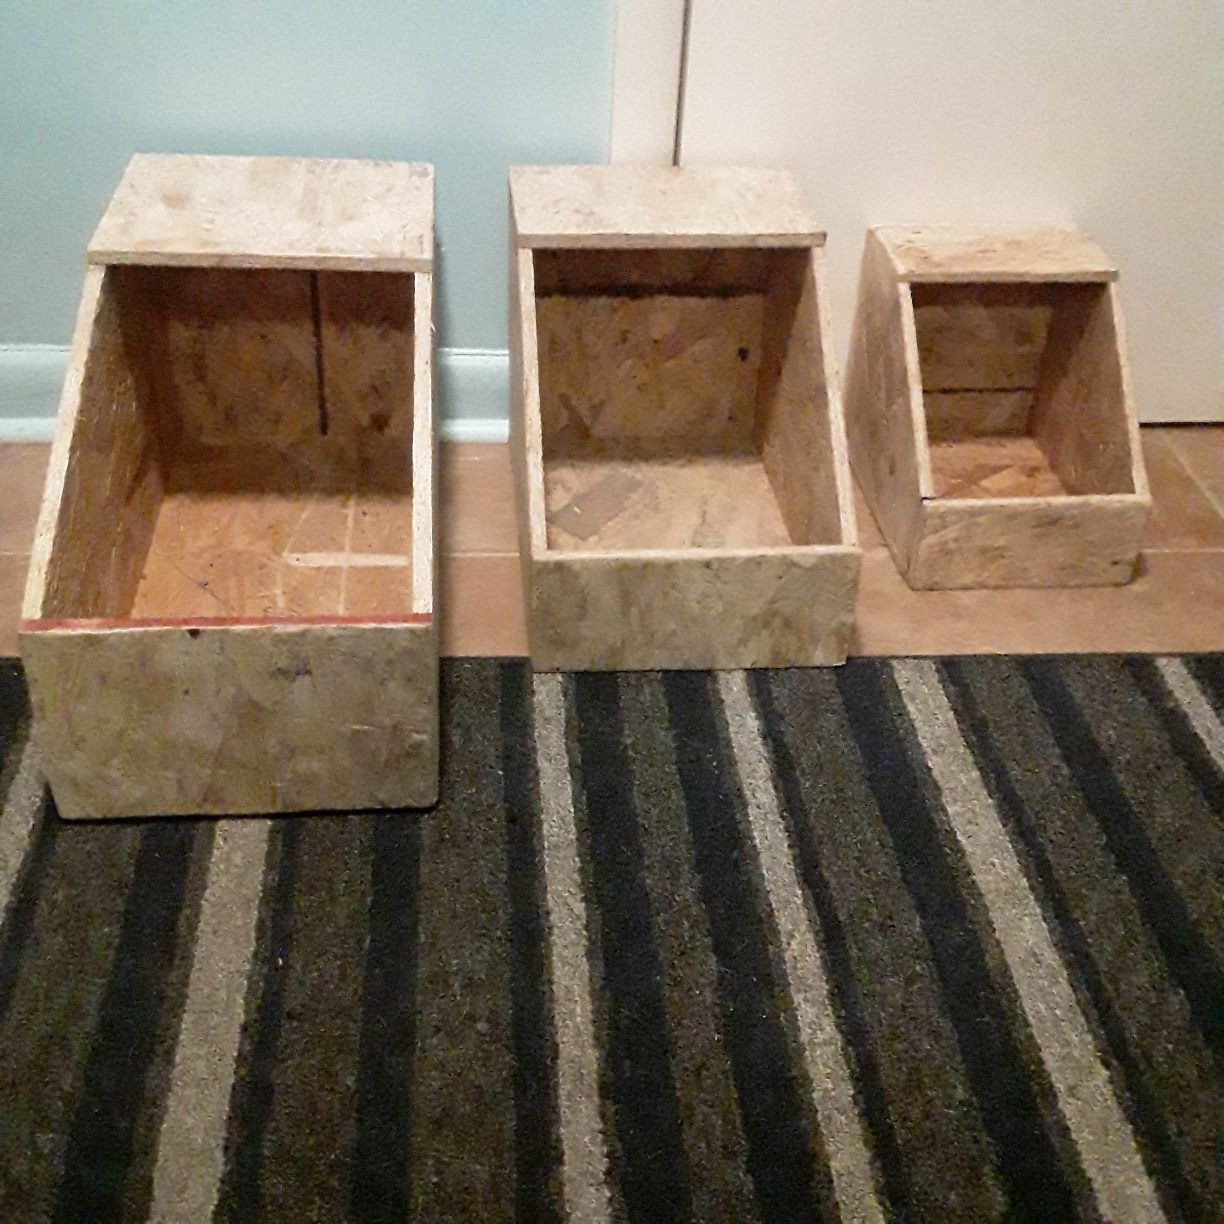 Nesting boxes for rabbits or chickens NEW